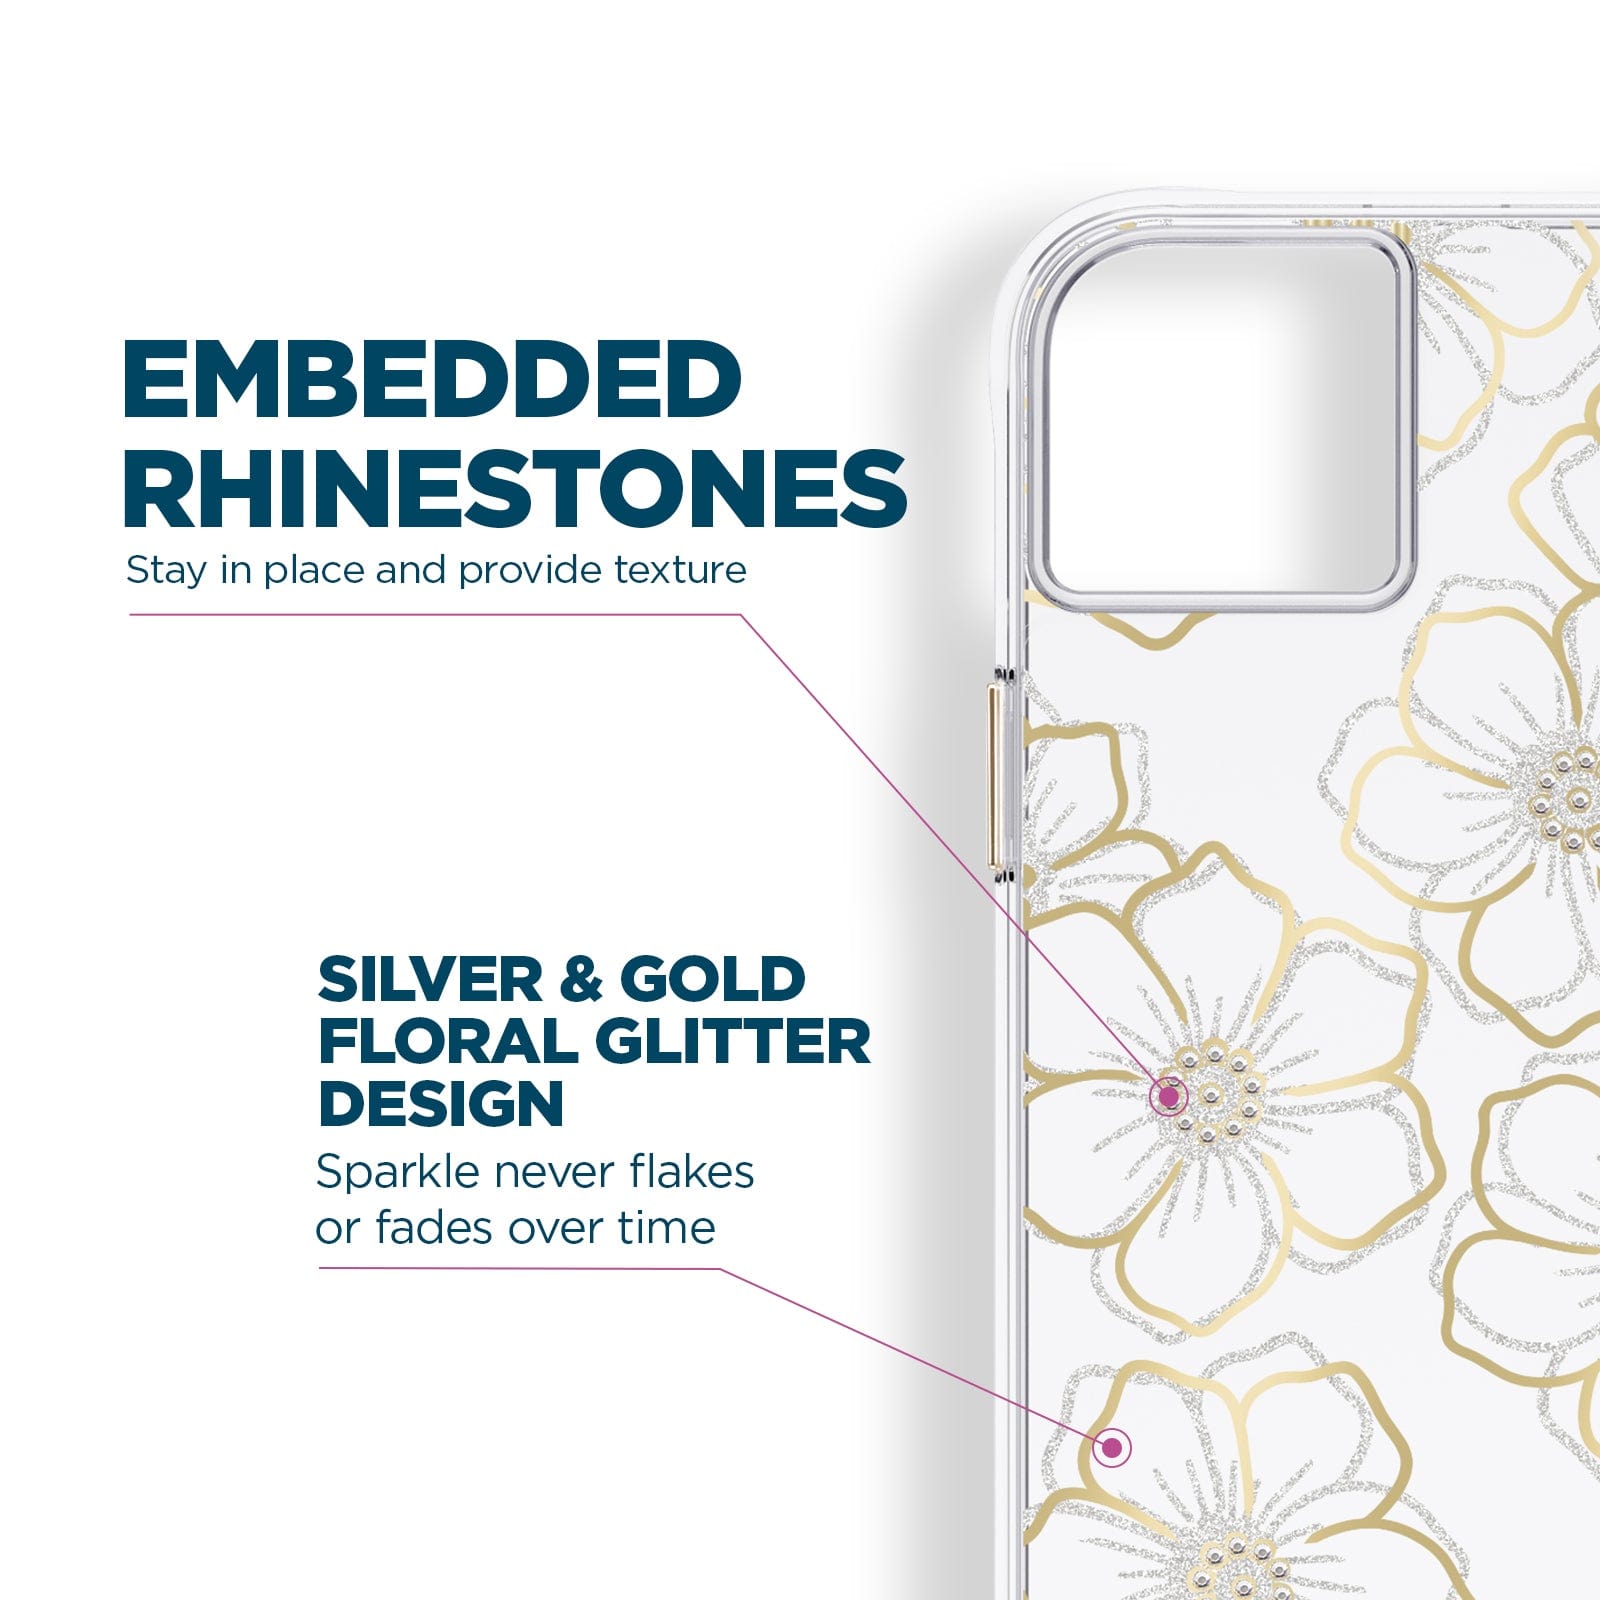 Embedded rhinestones stay in place and provide texture. Silver & gold floral glitter design. Sparkle never flakes or fades over time.